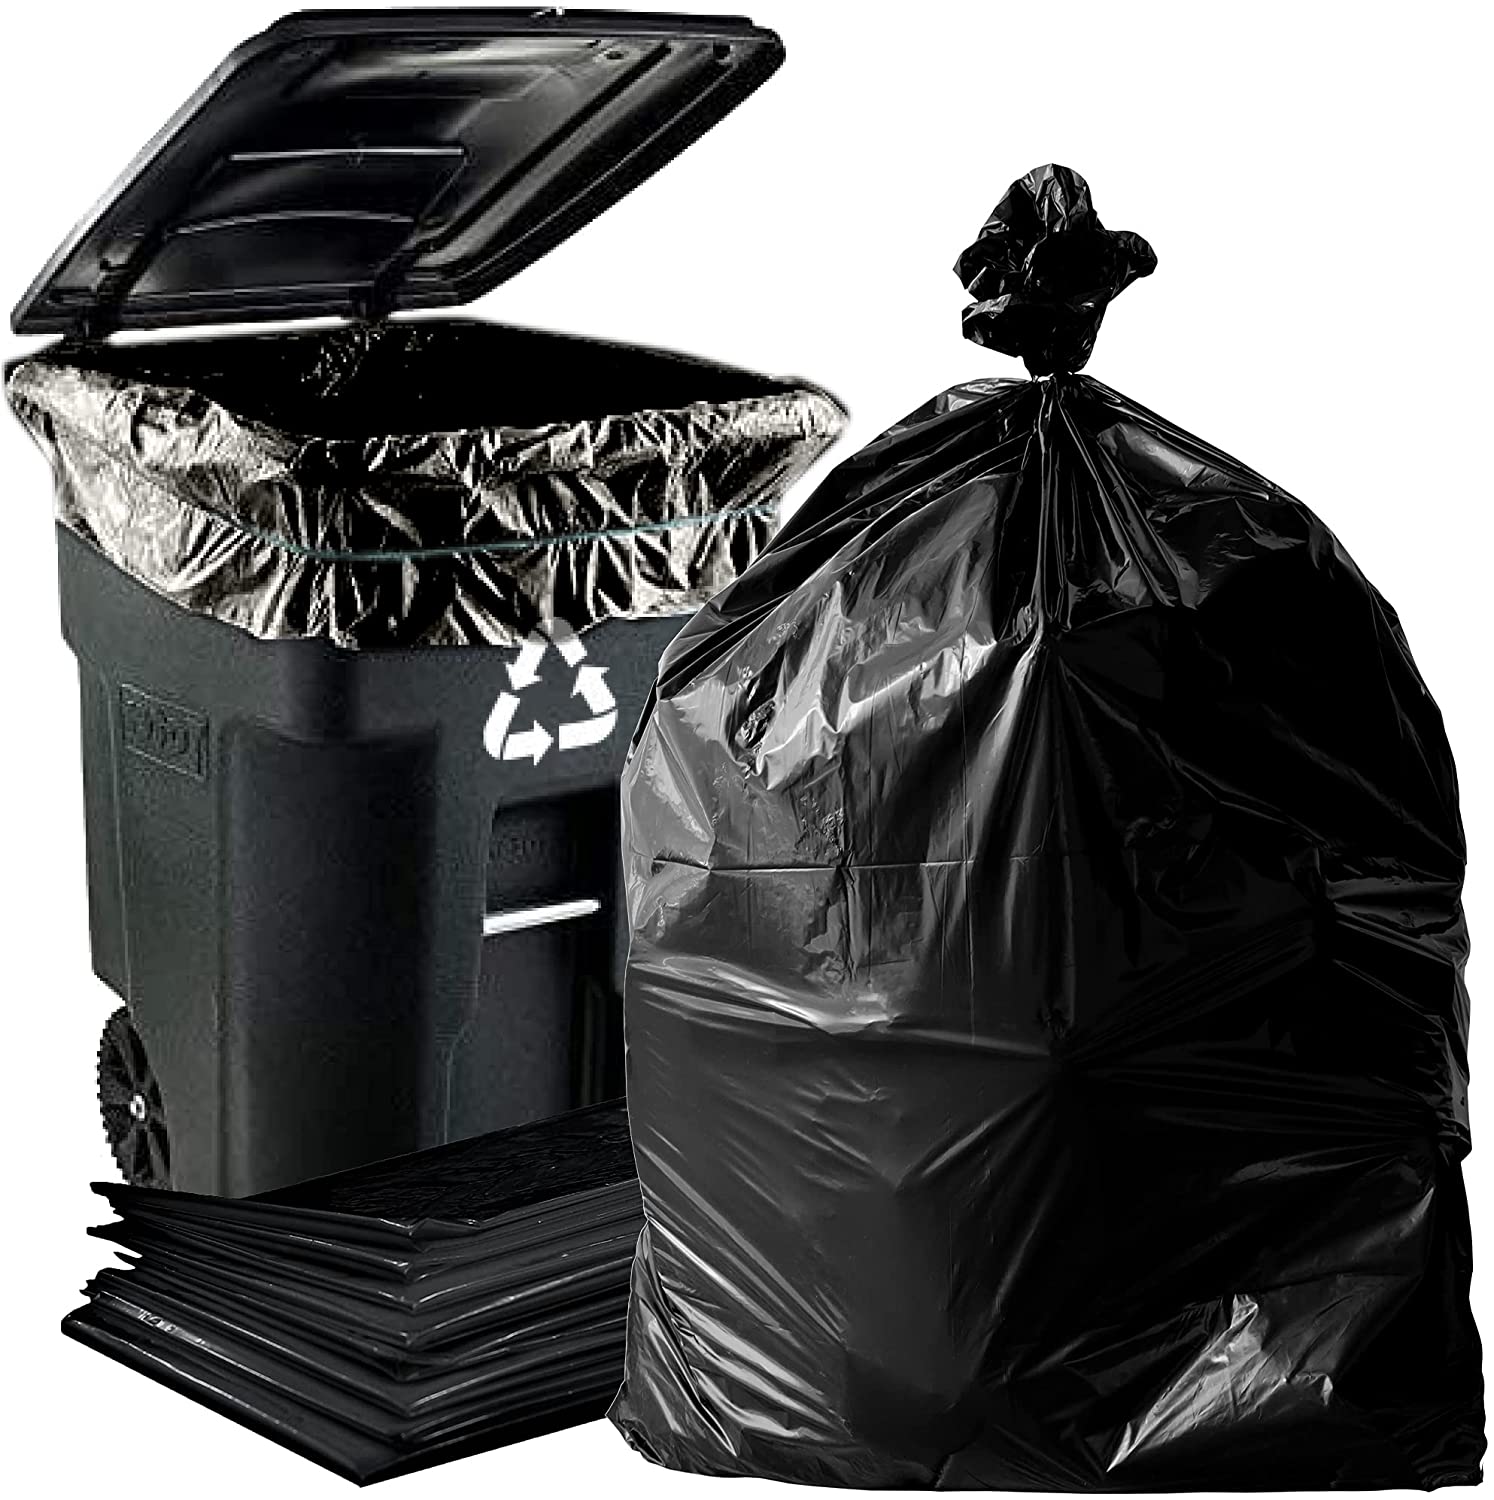 Dyno Products Online 65 Gallon Large, Heavy Duty Trash Bags, 1.5 Mil Black  - 50 Count - Individually Folded – 50W x 48L